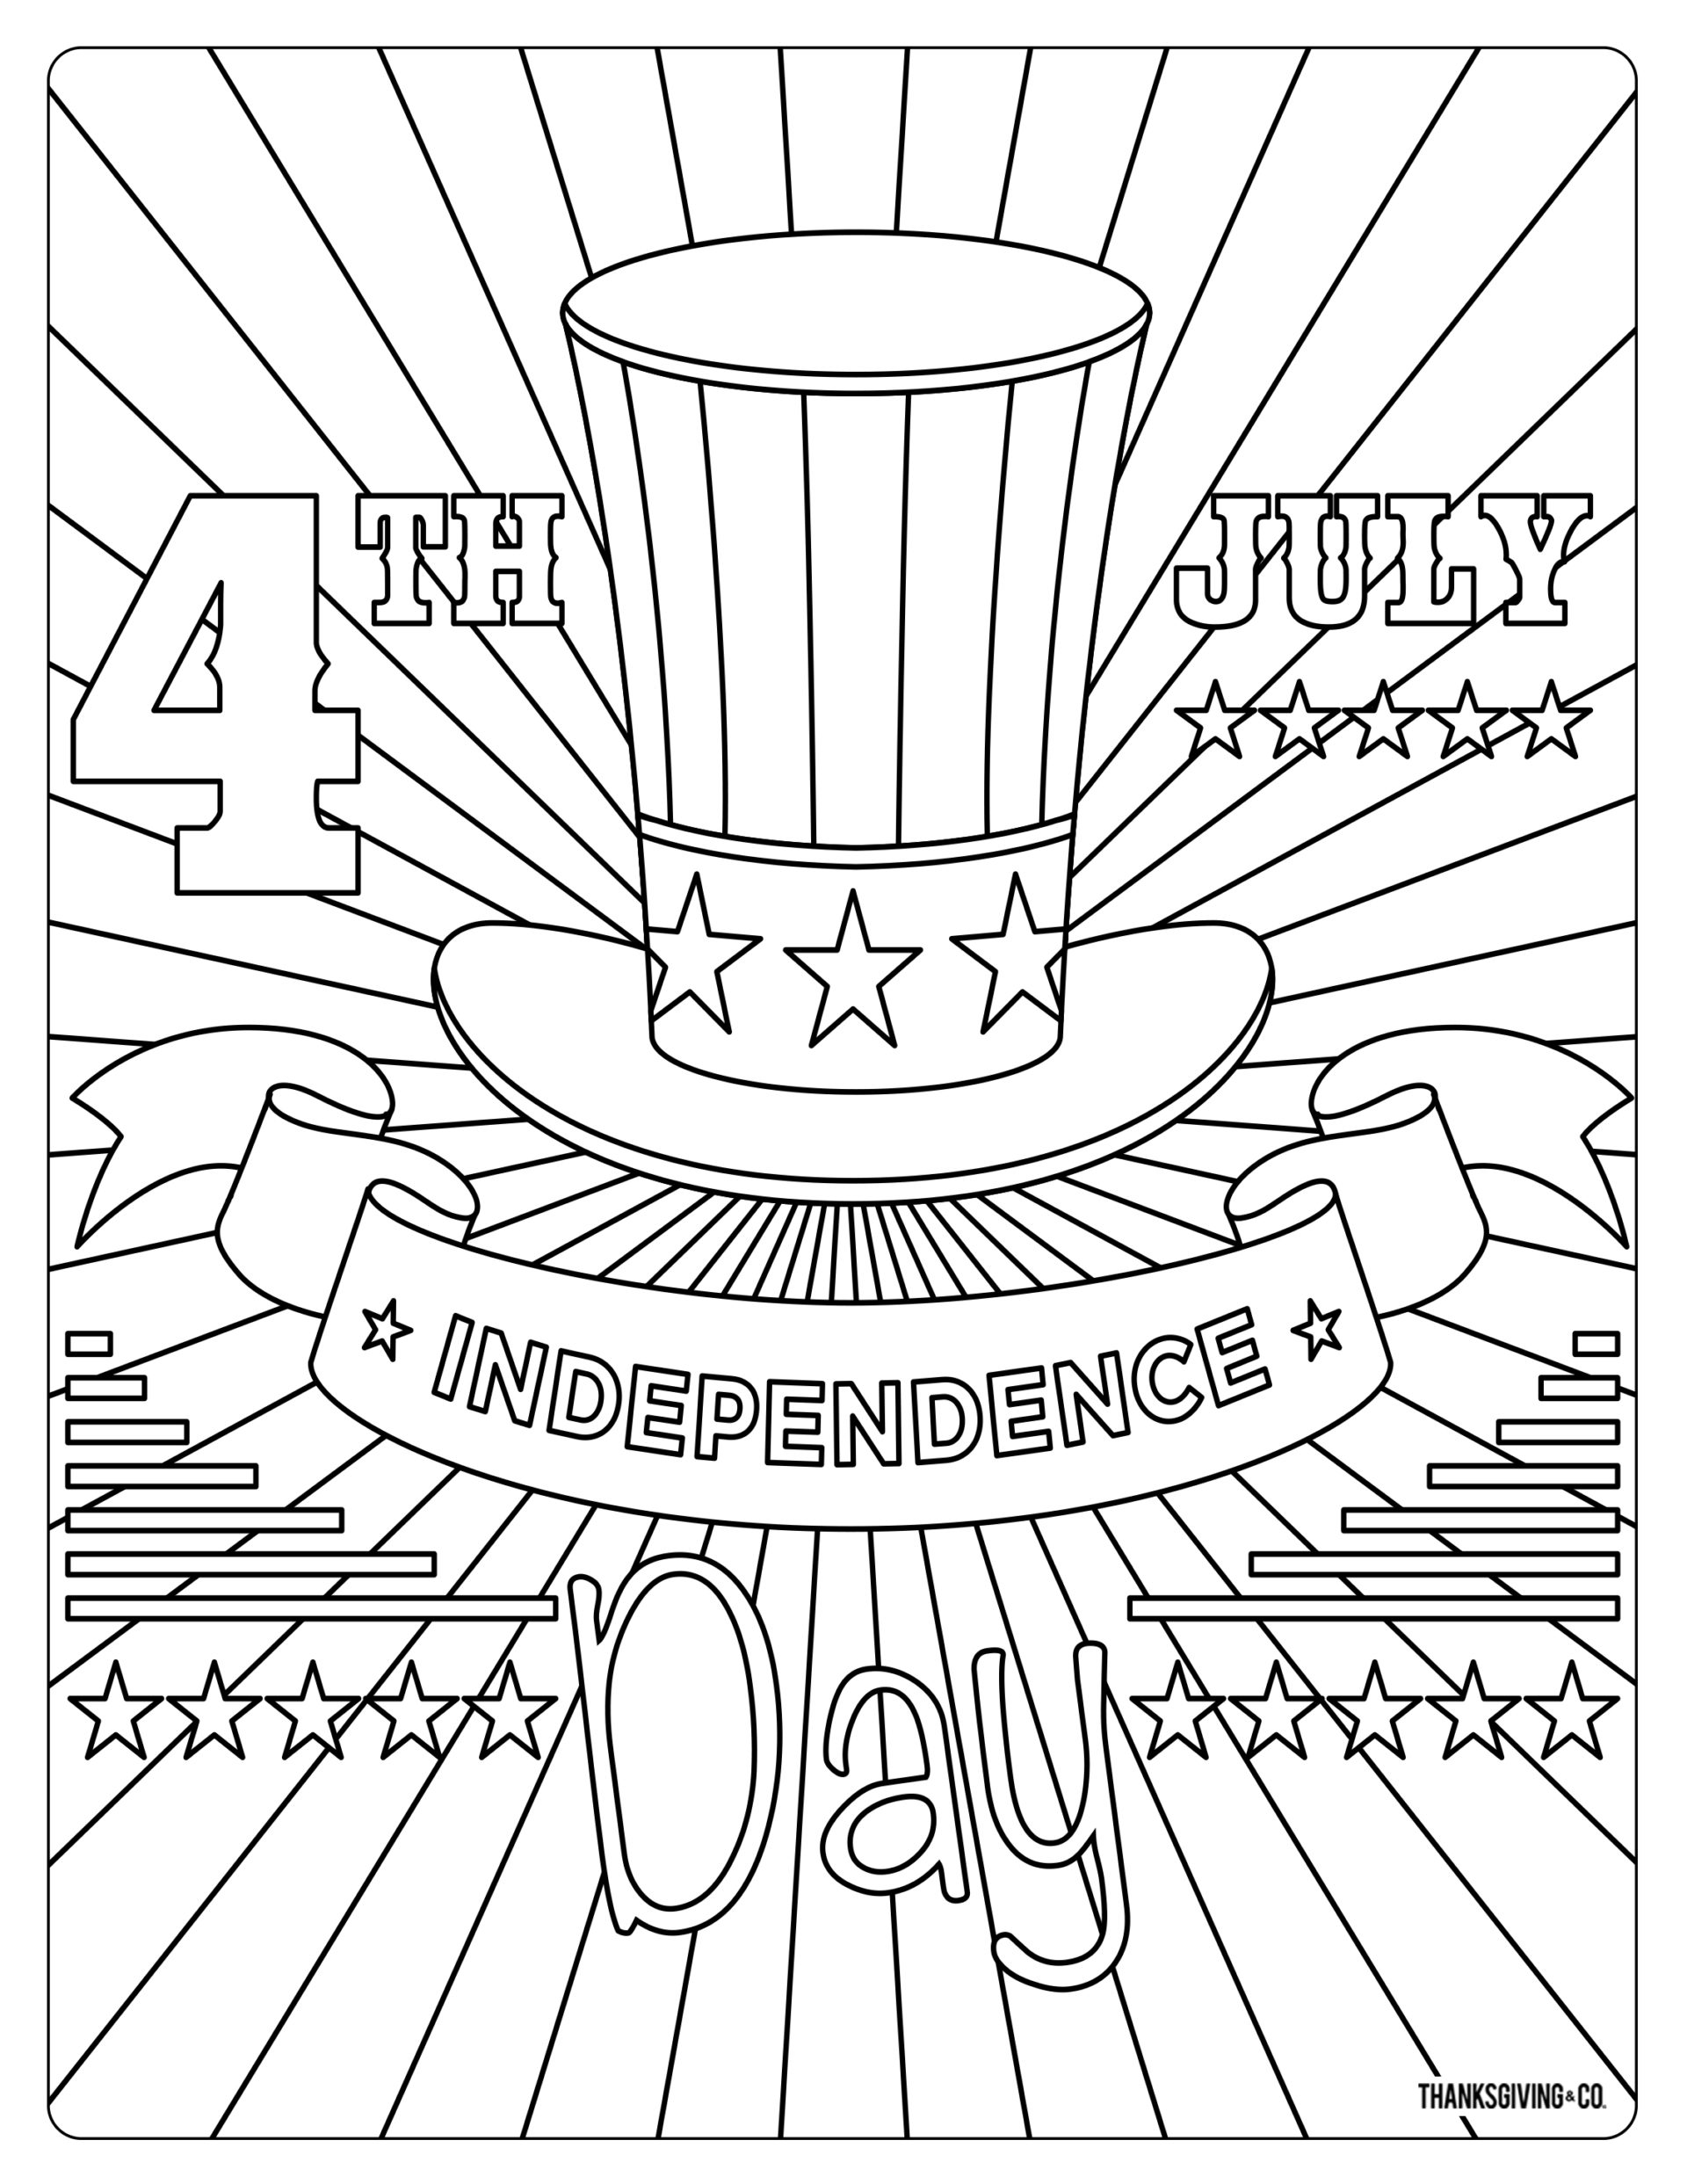 july-4th-coloring-pages-for-adults-mccray-ittless